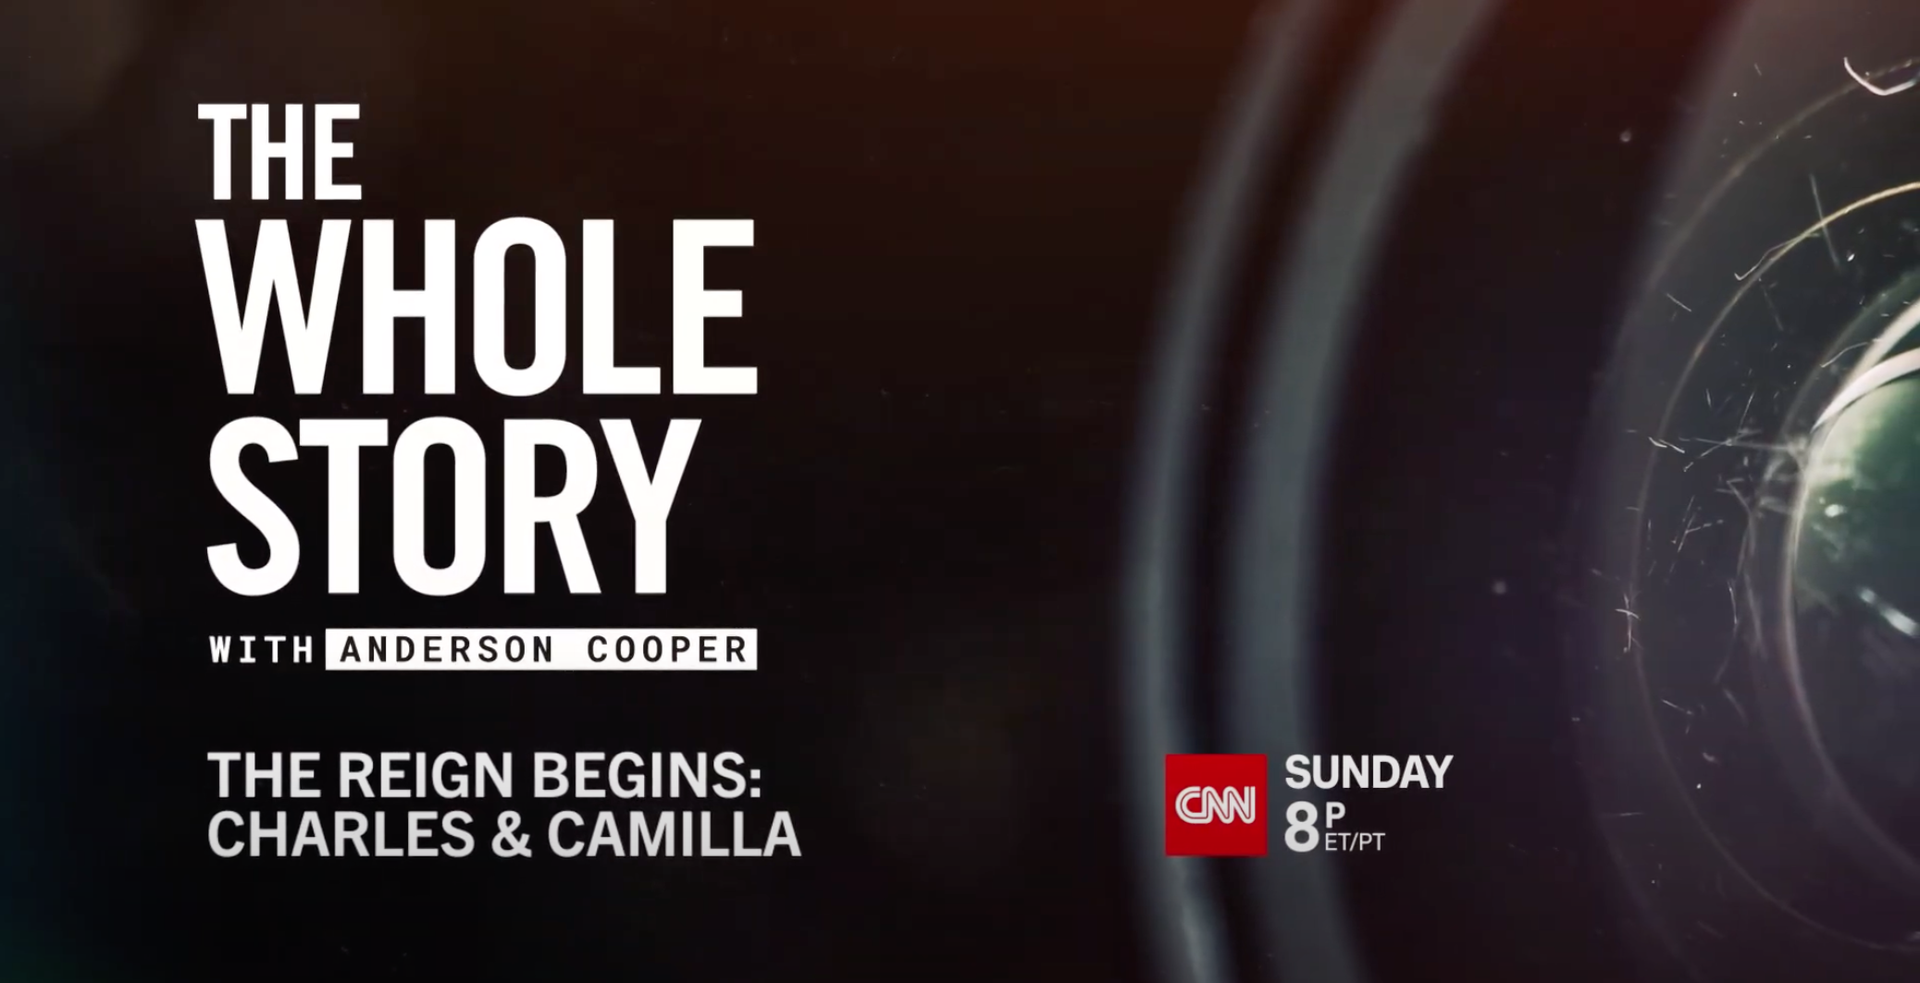 The Whole Story with Anderson Cooper documentary on Charles and Camilla airs Sunday, 8 p.m. ET.